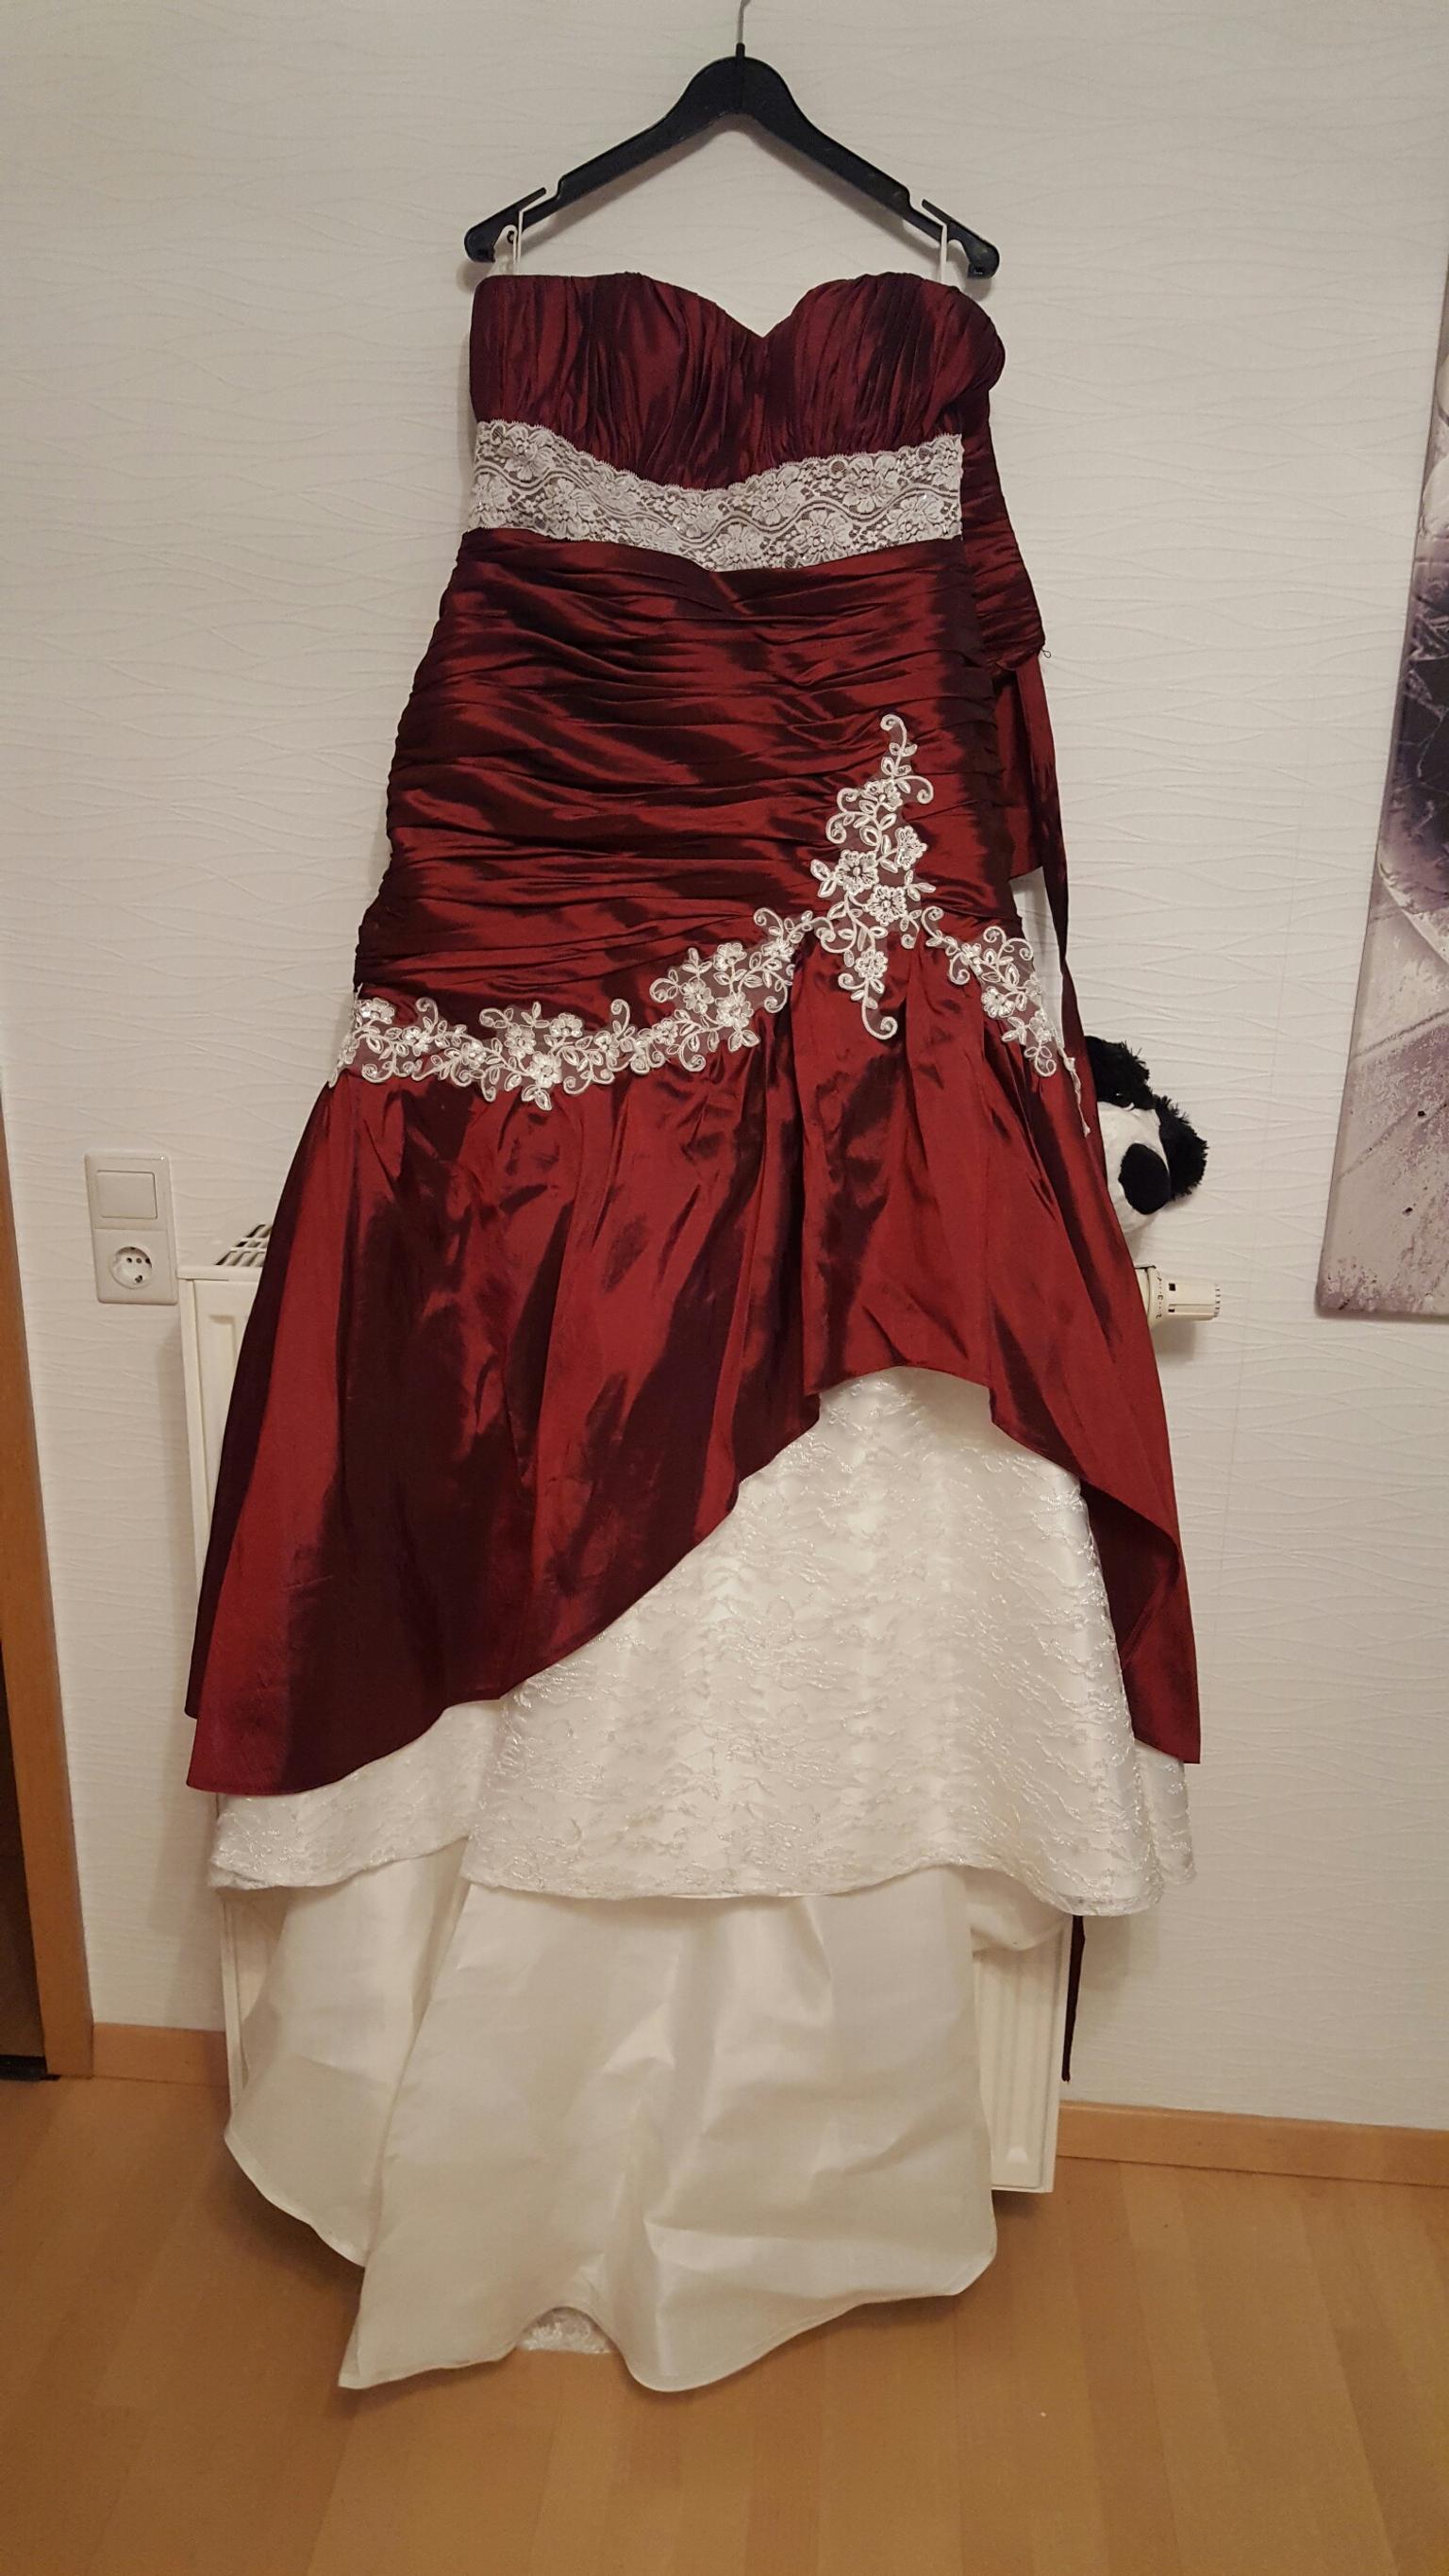 Standesamt Kleid Weiss Rot Gr 48 50 In 57413 Finnentrop For 105 00 For Sale Shpock